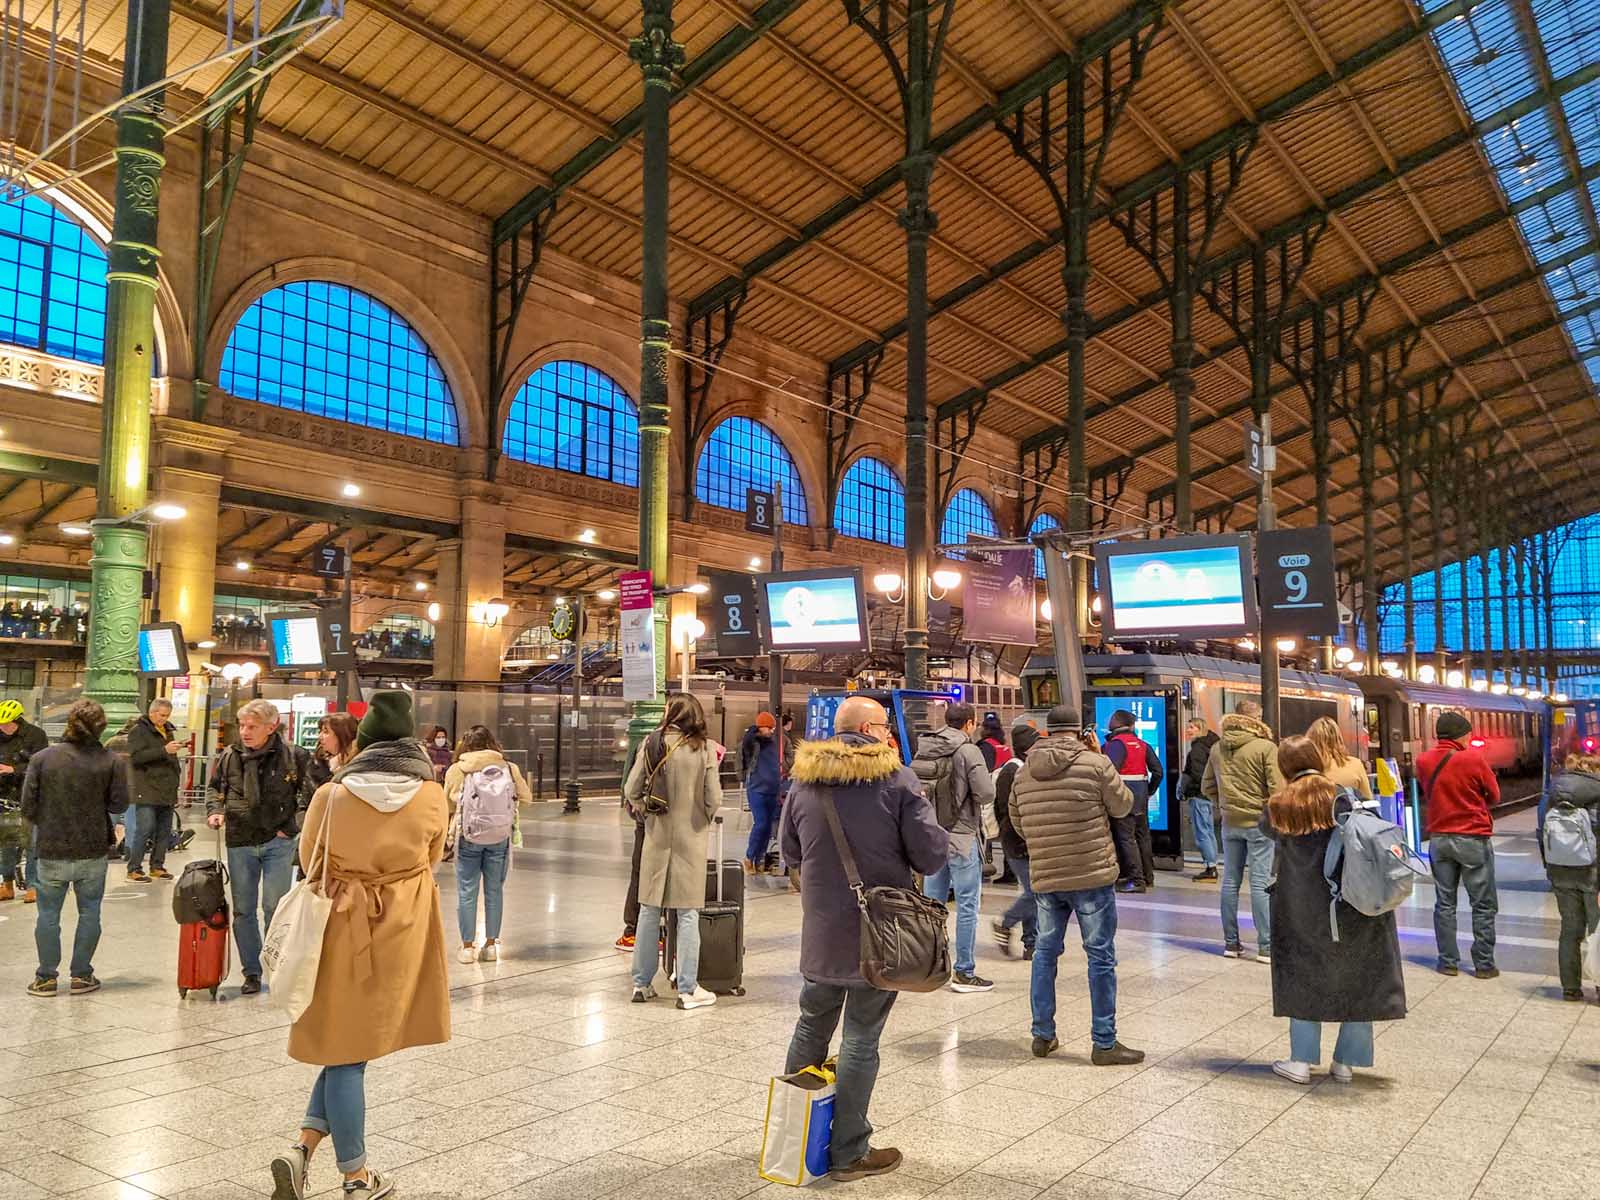 People walking in the platforms of the Gare du Nord station in Paris